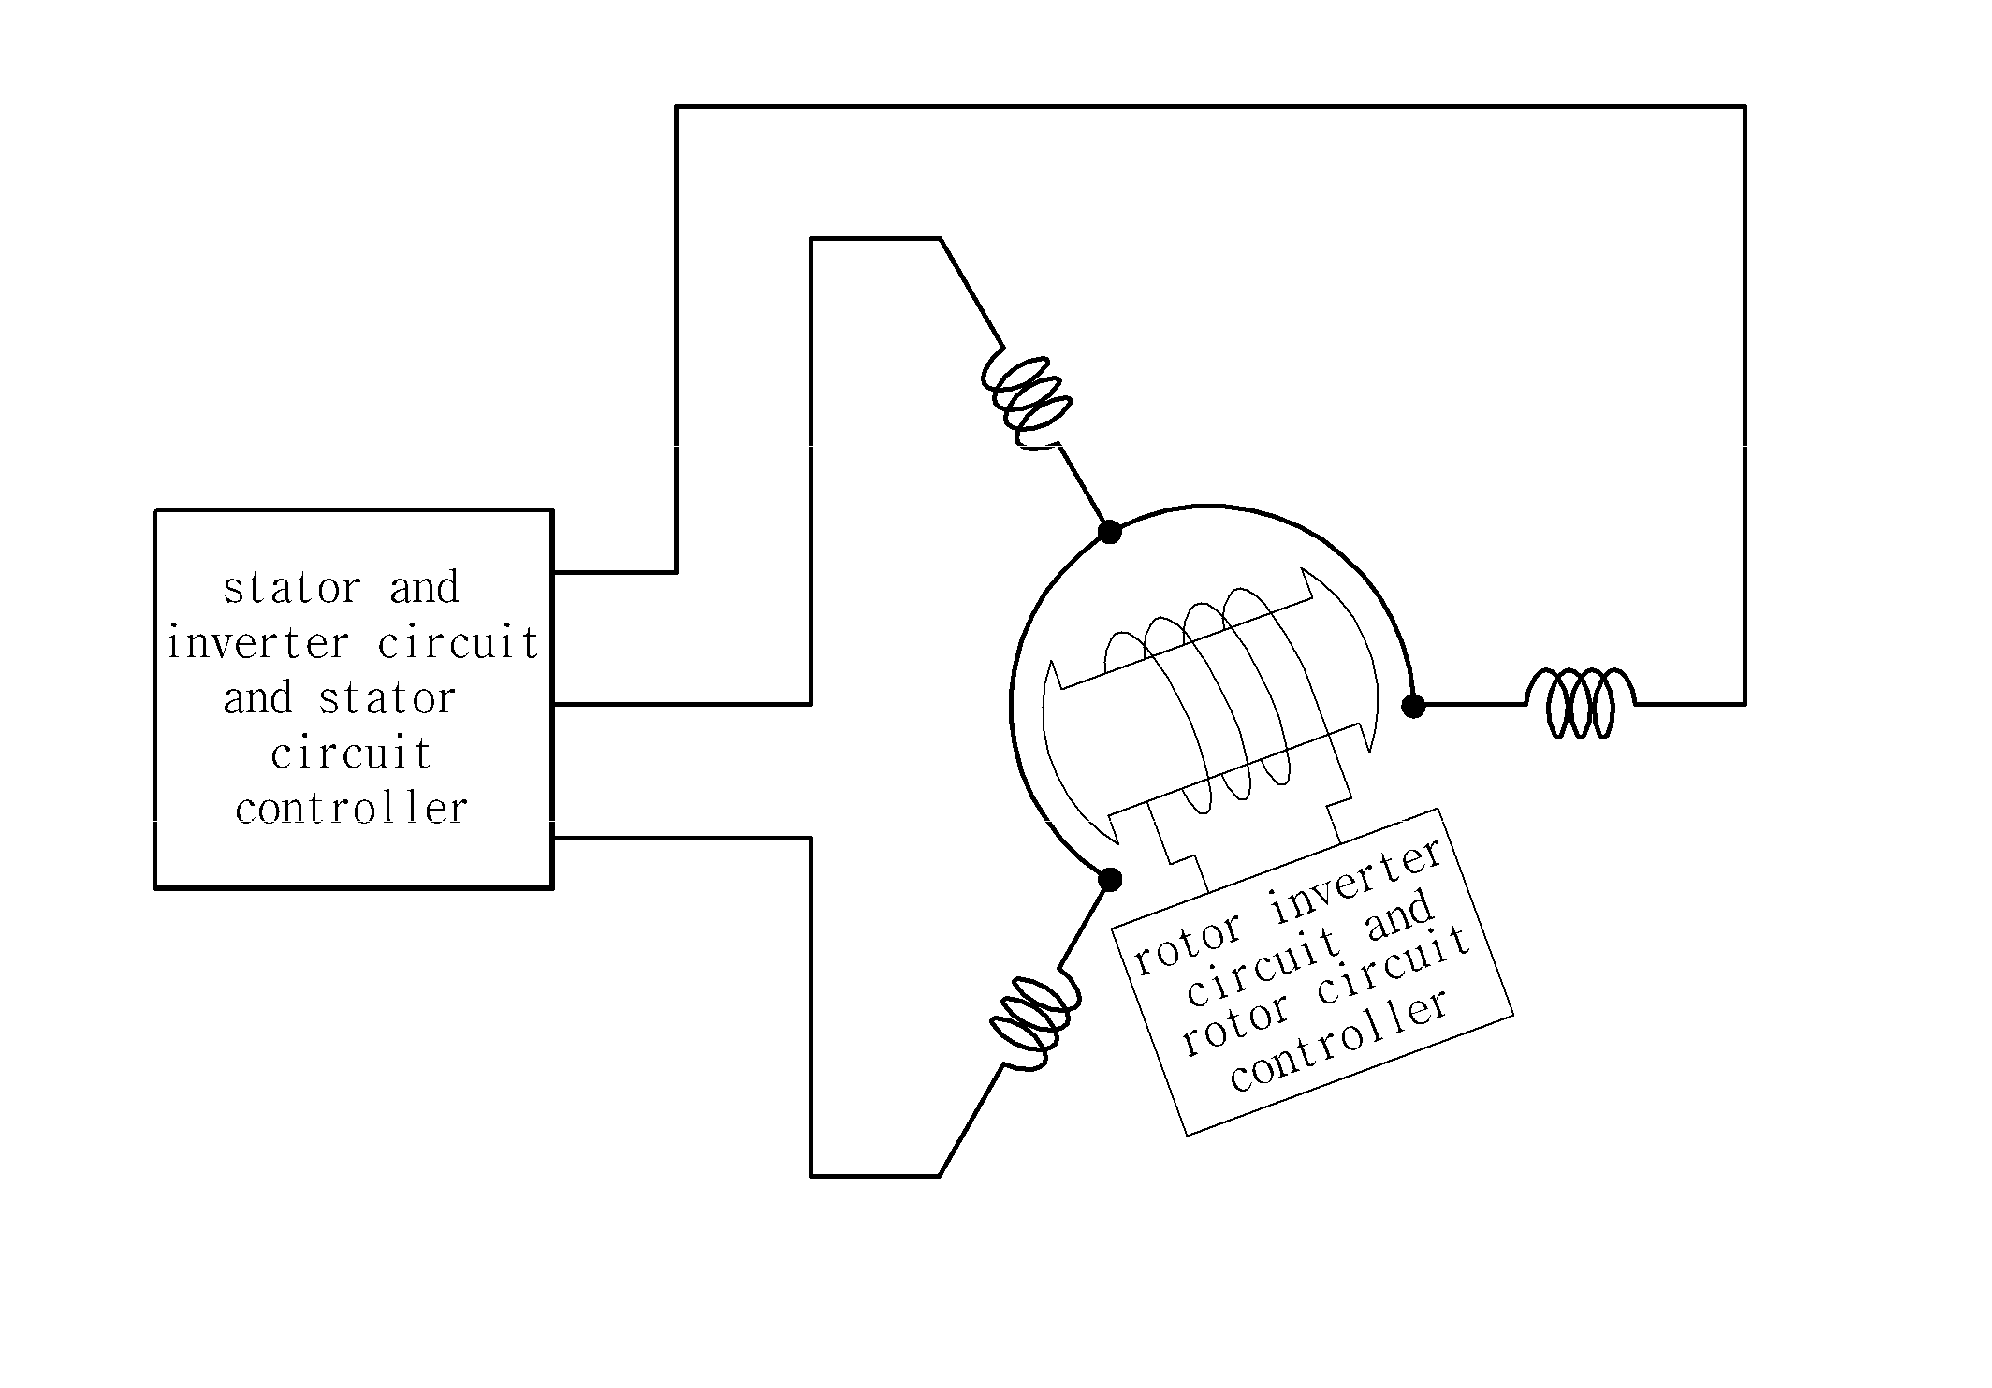 Winding synchronous machine having a moving object including an inverter circuit, and method for controlling same